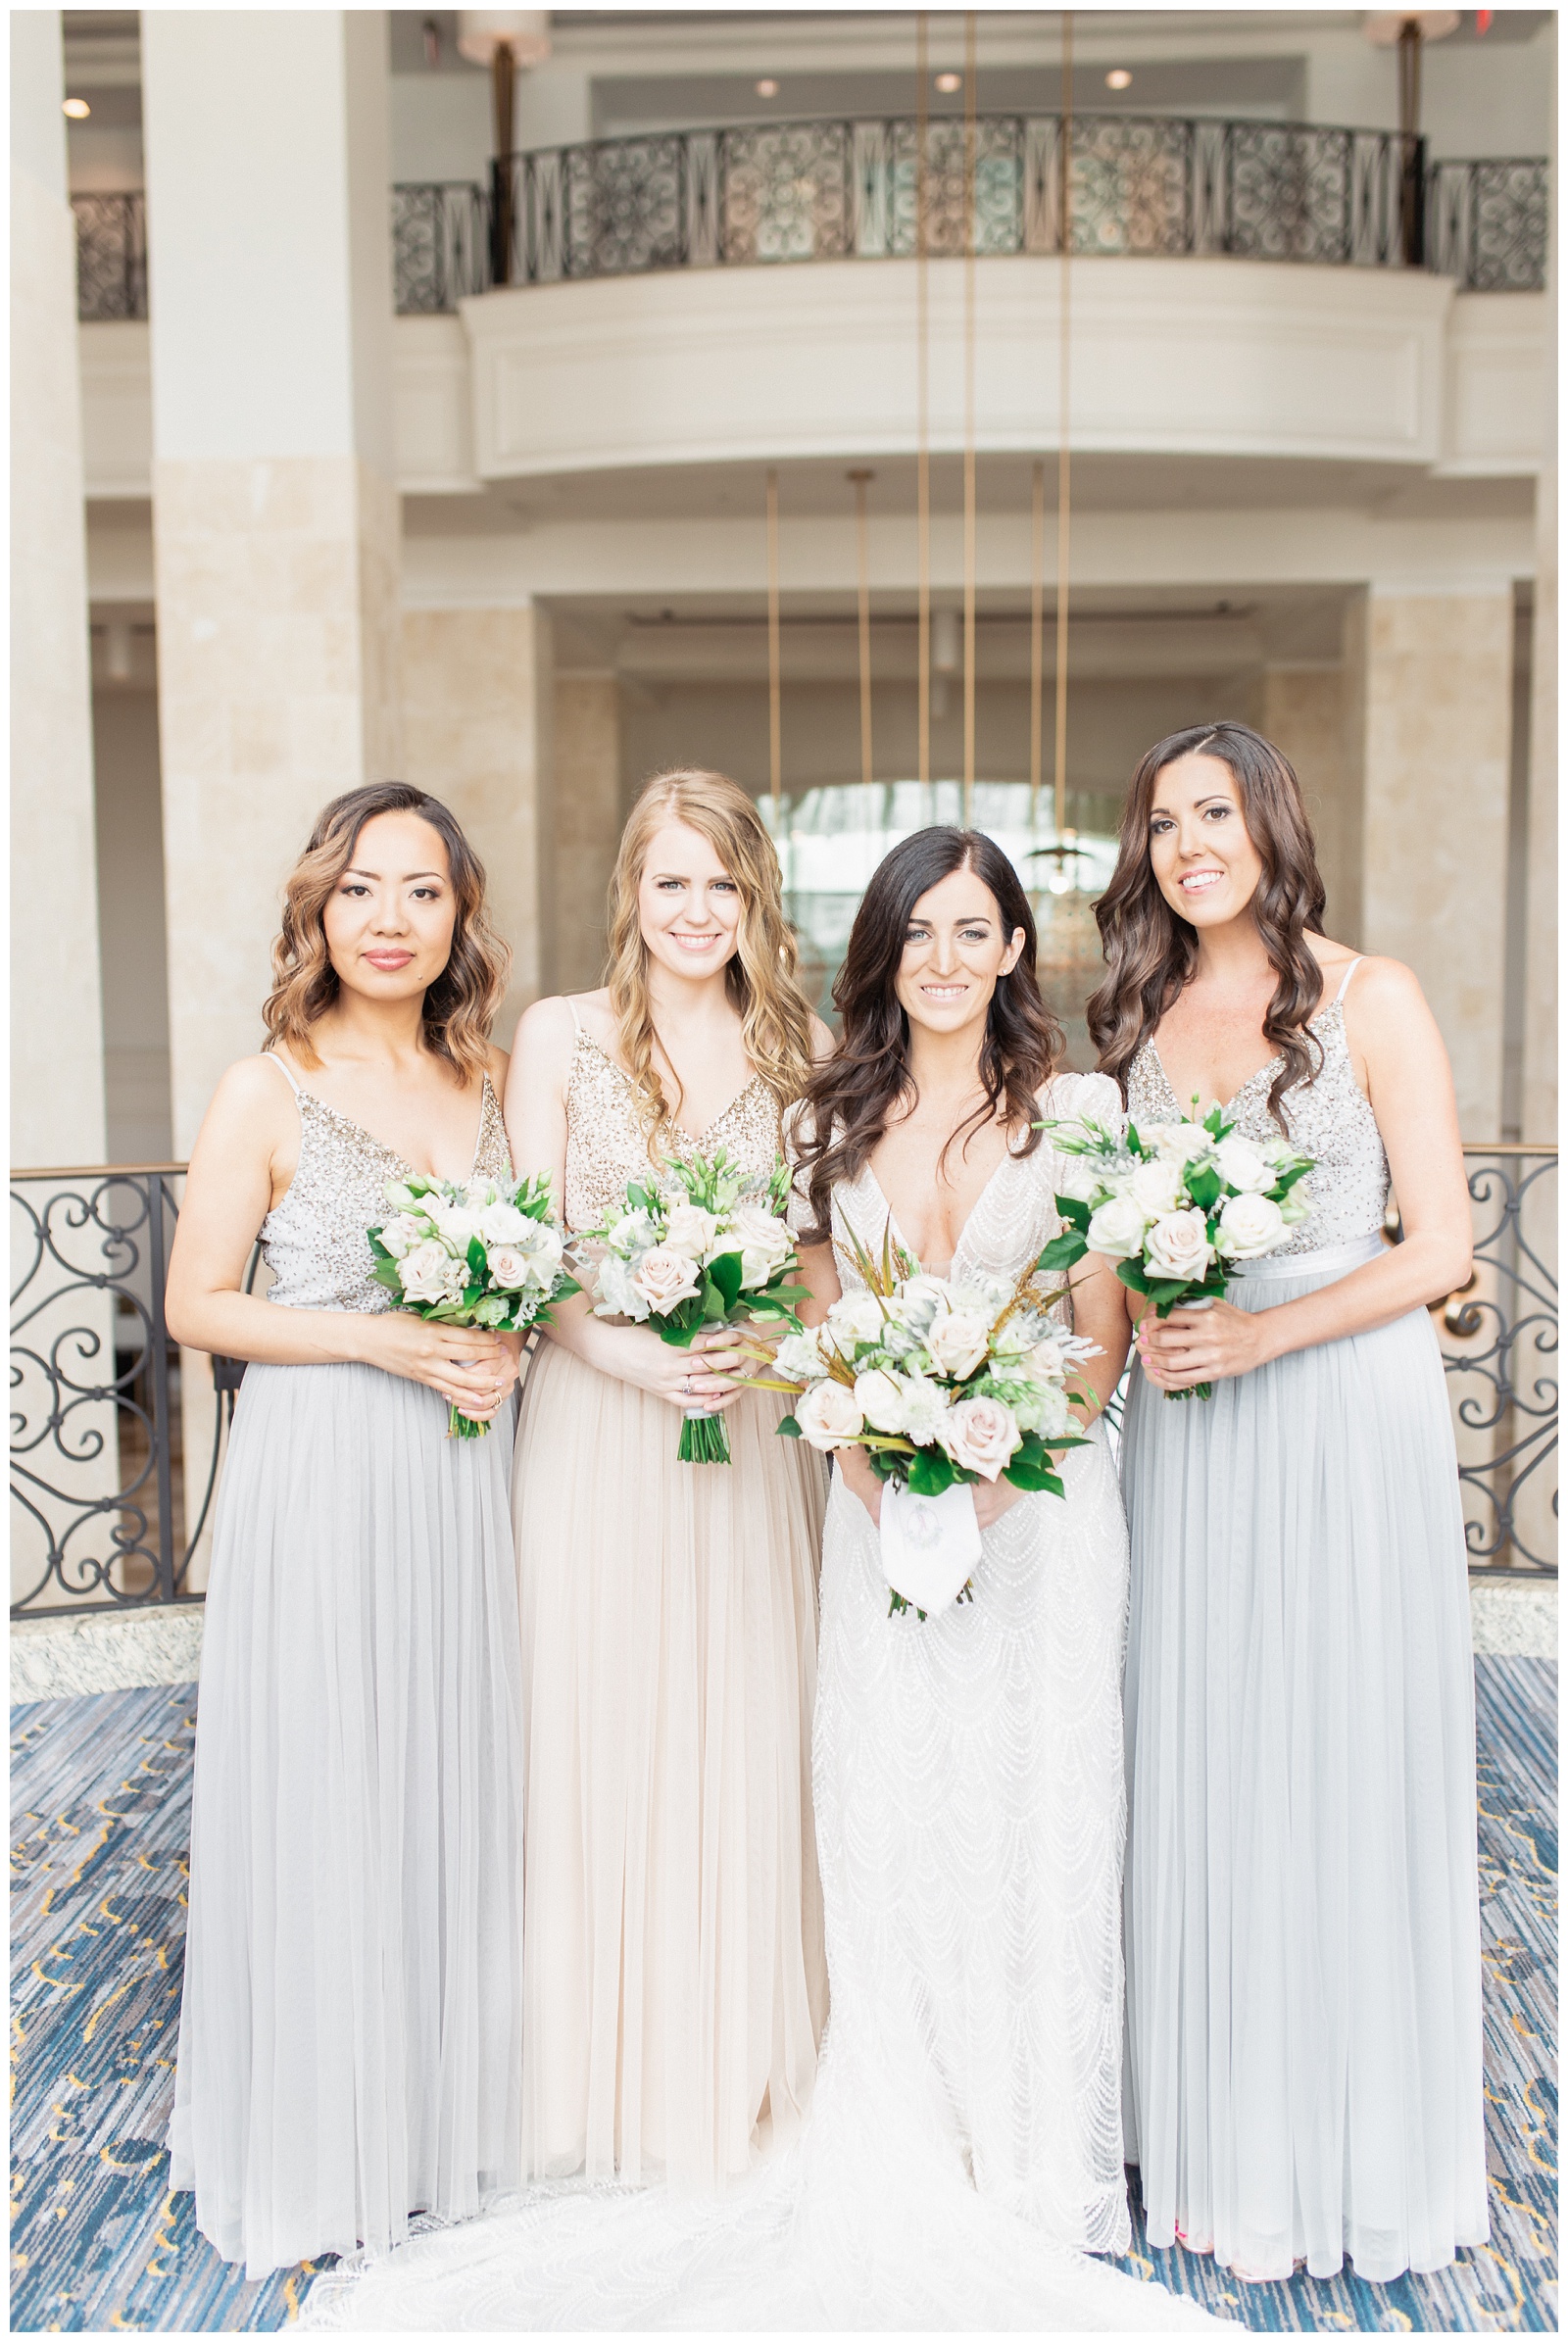 Bride with bridesmaids | Matlock and Kelly Photography